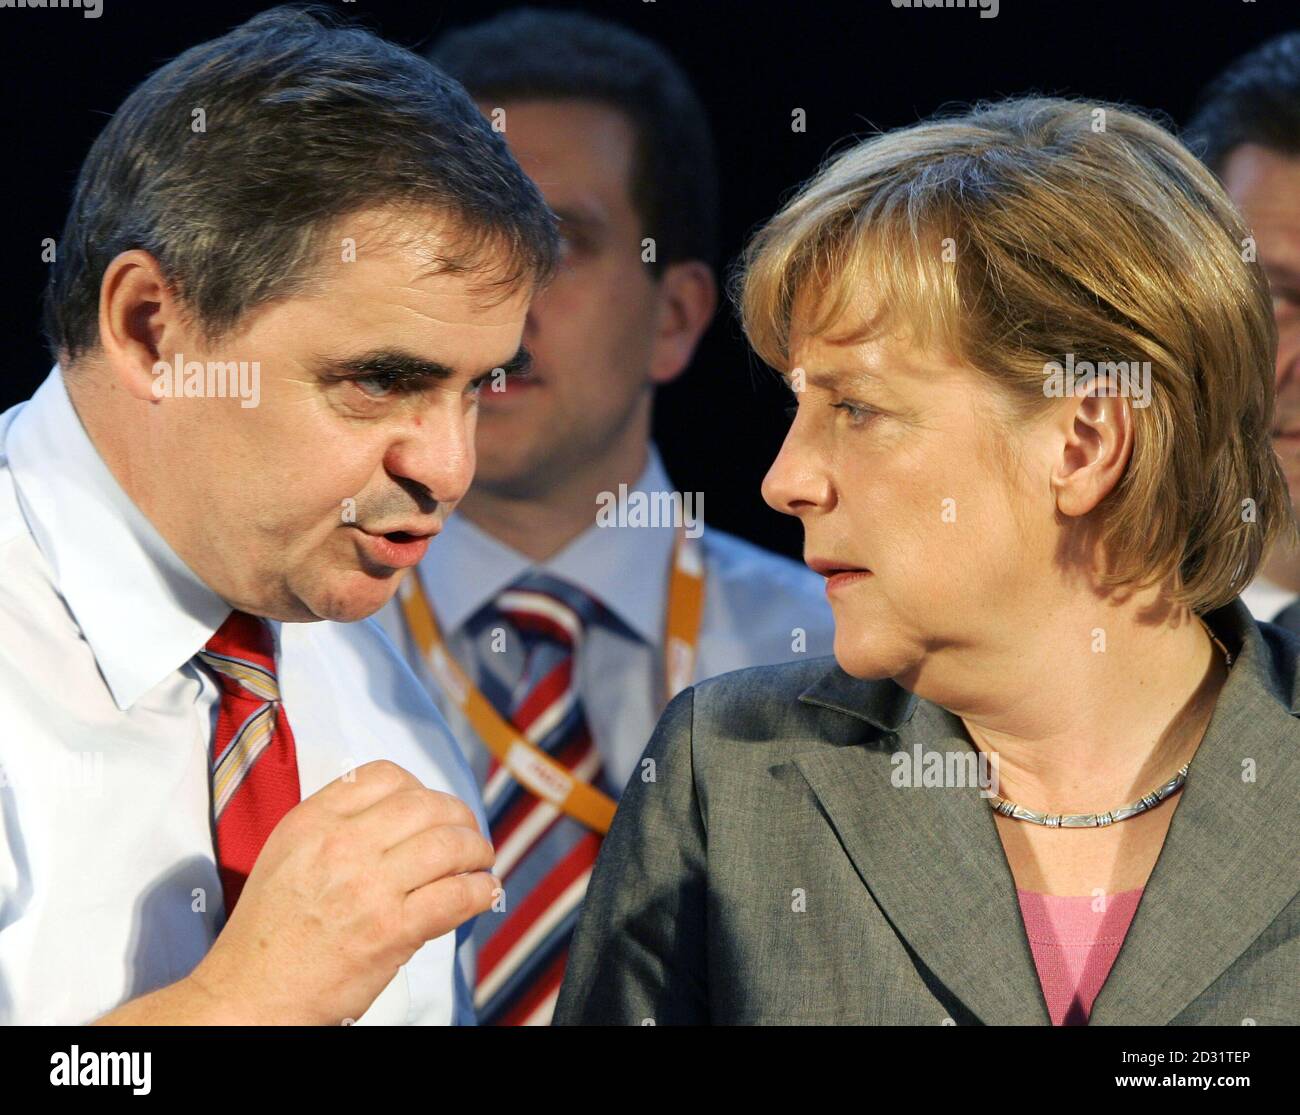 Angela Merkel, CDU's top candidate for the upcoming general elections, and  Saarland State Premier Mueller talk during campaign rally in Nohfelden.  Angela Merkel (R), Christian Democratic Union's (CDU) top candidate for the